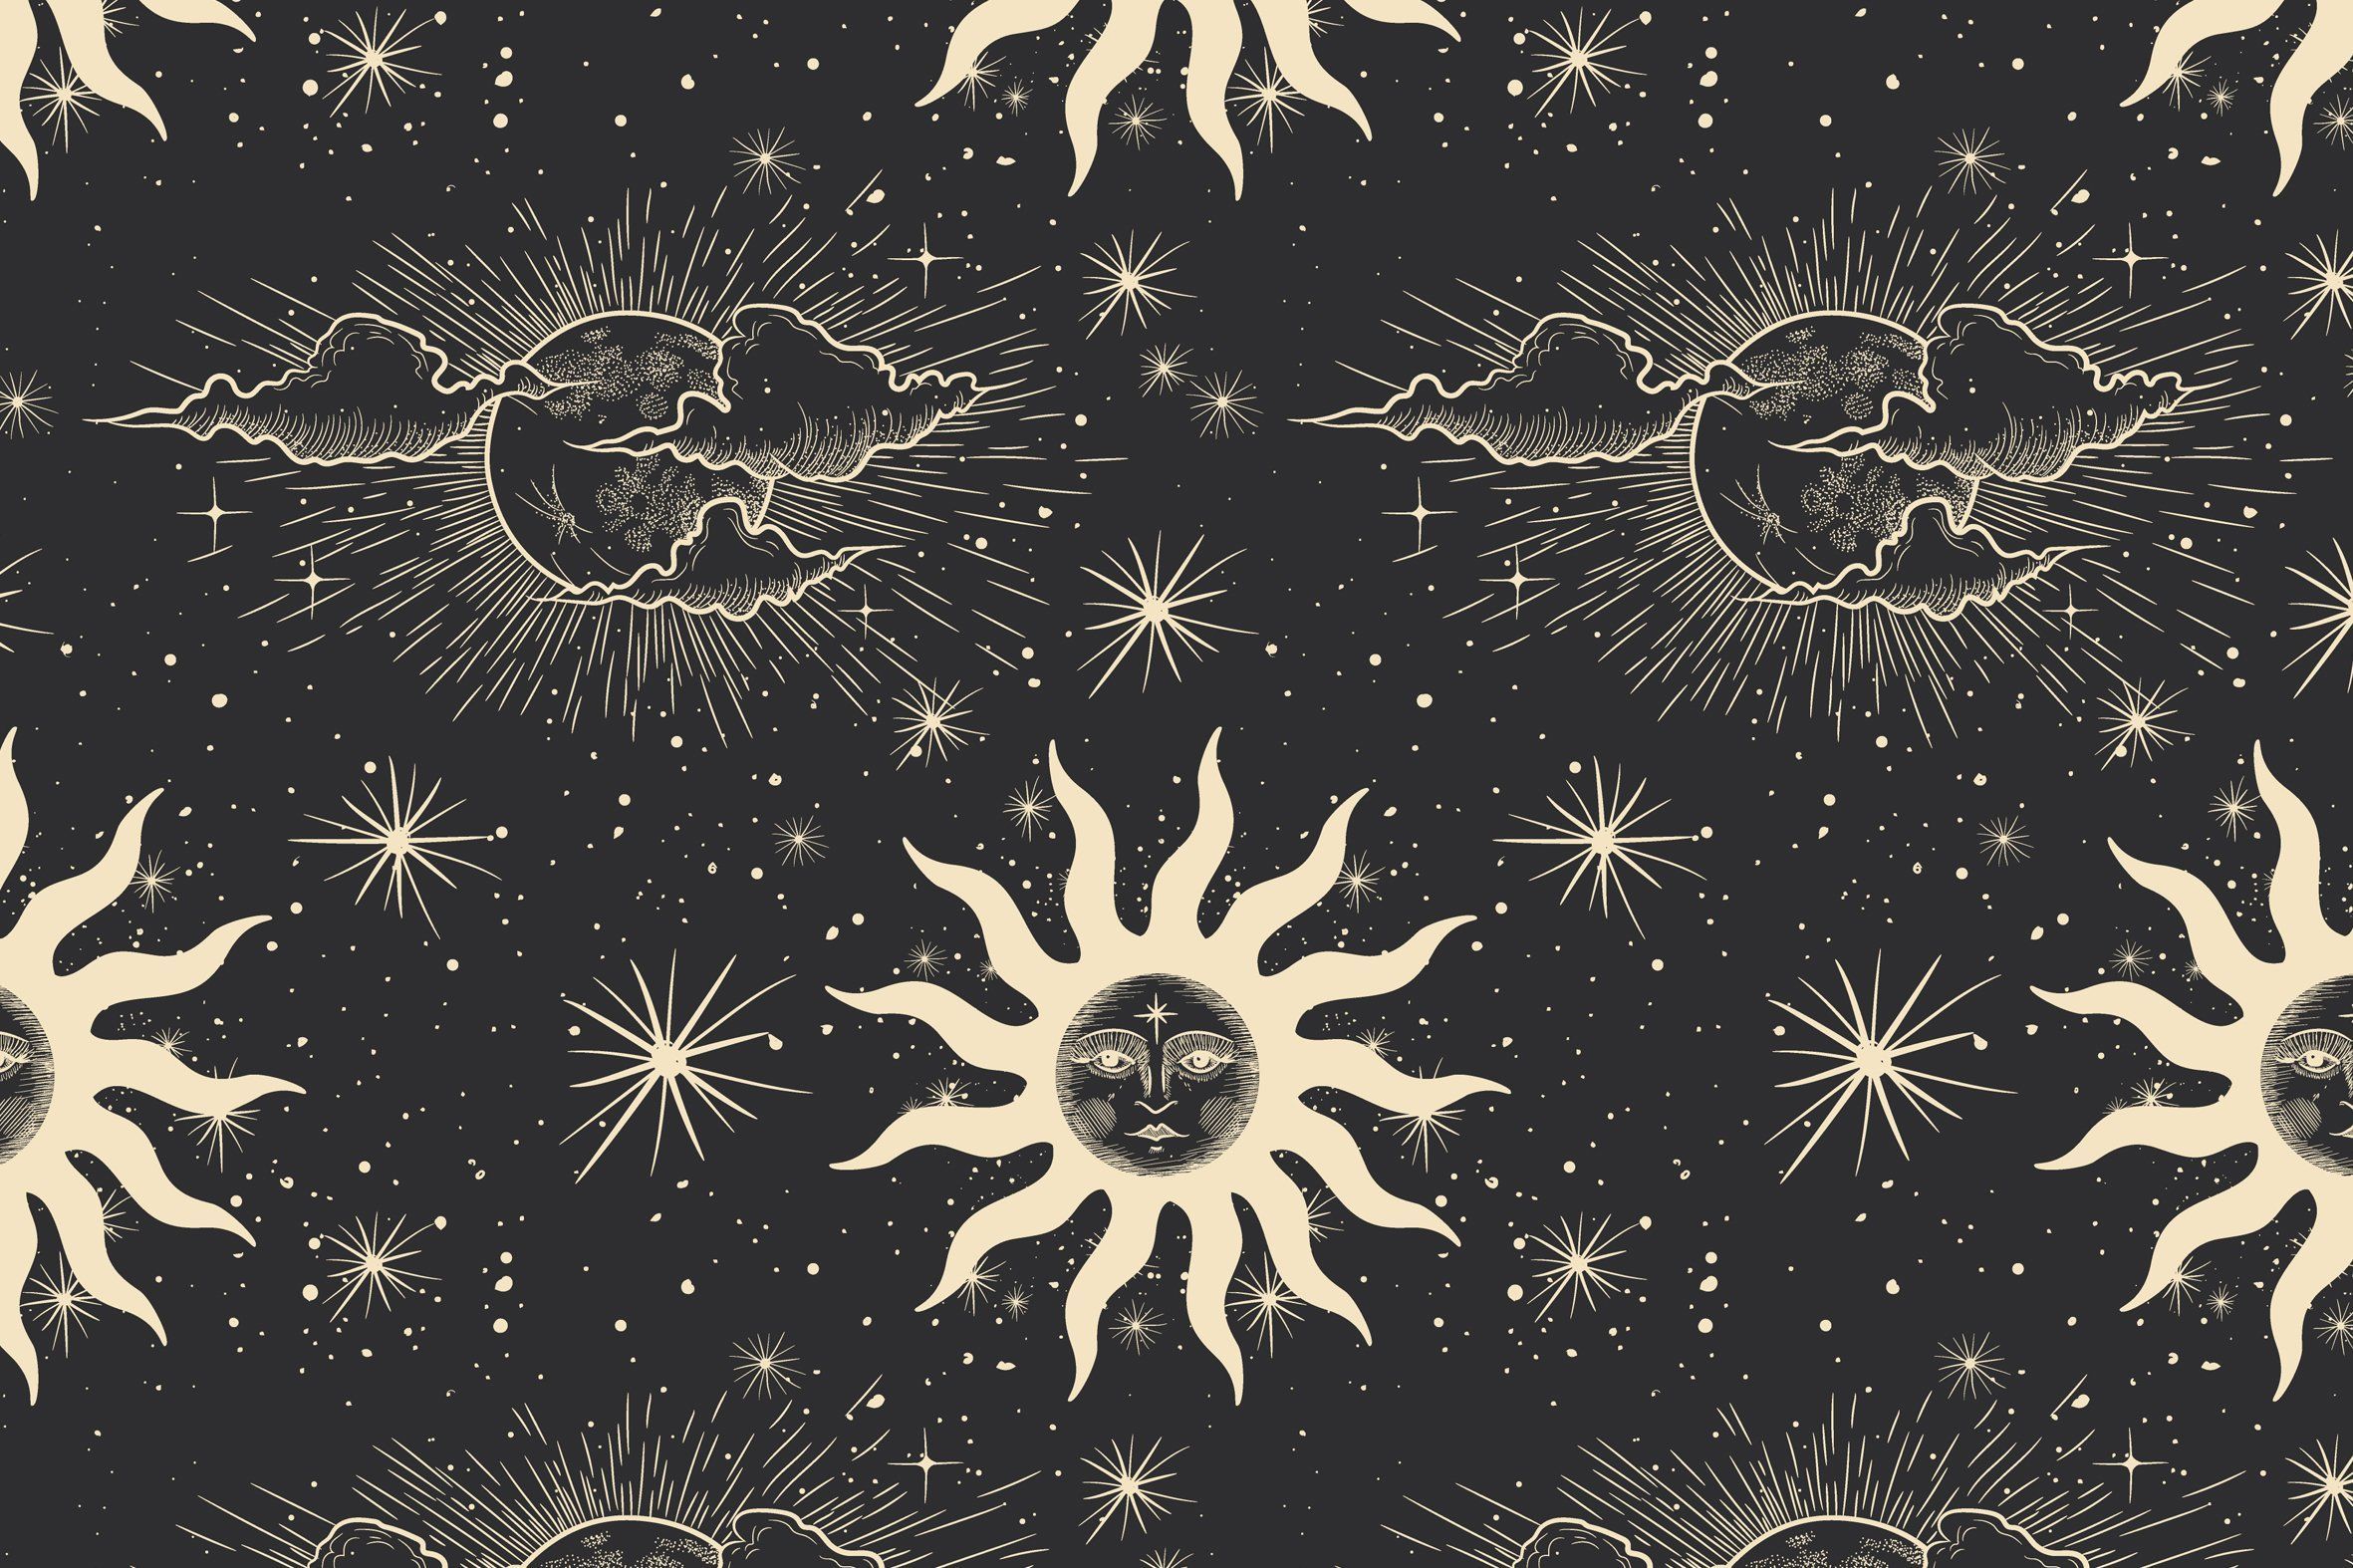 A vintage style seamless pattern with moon and sun - Spiritual